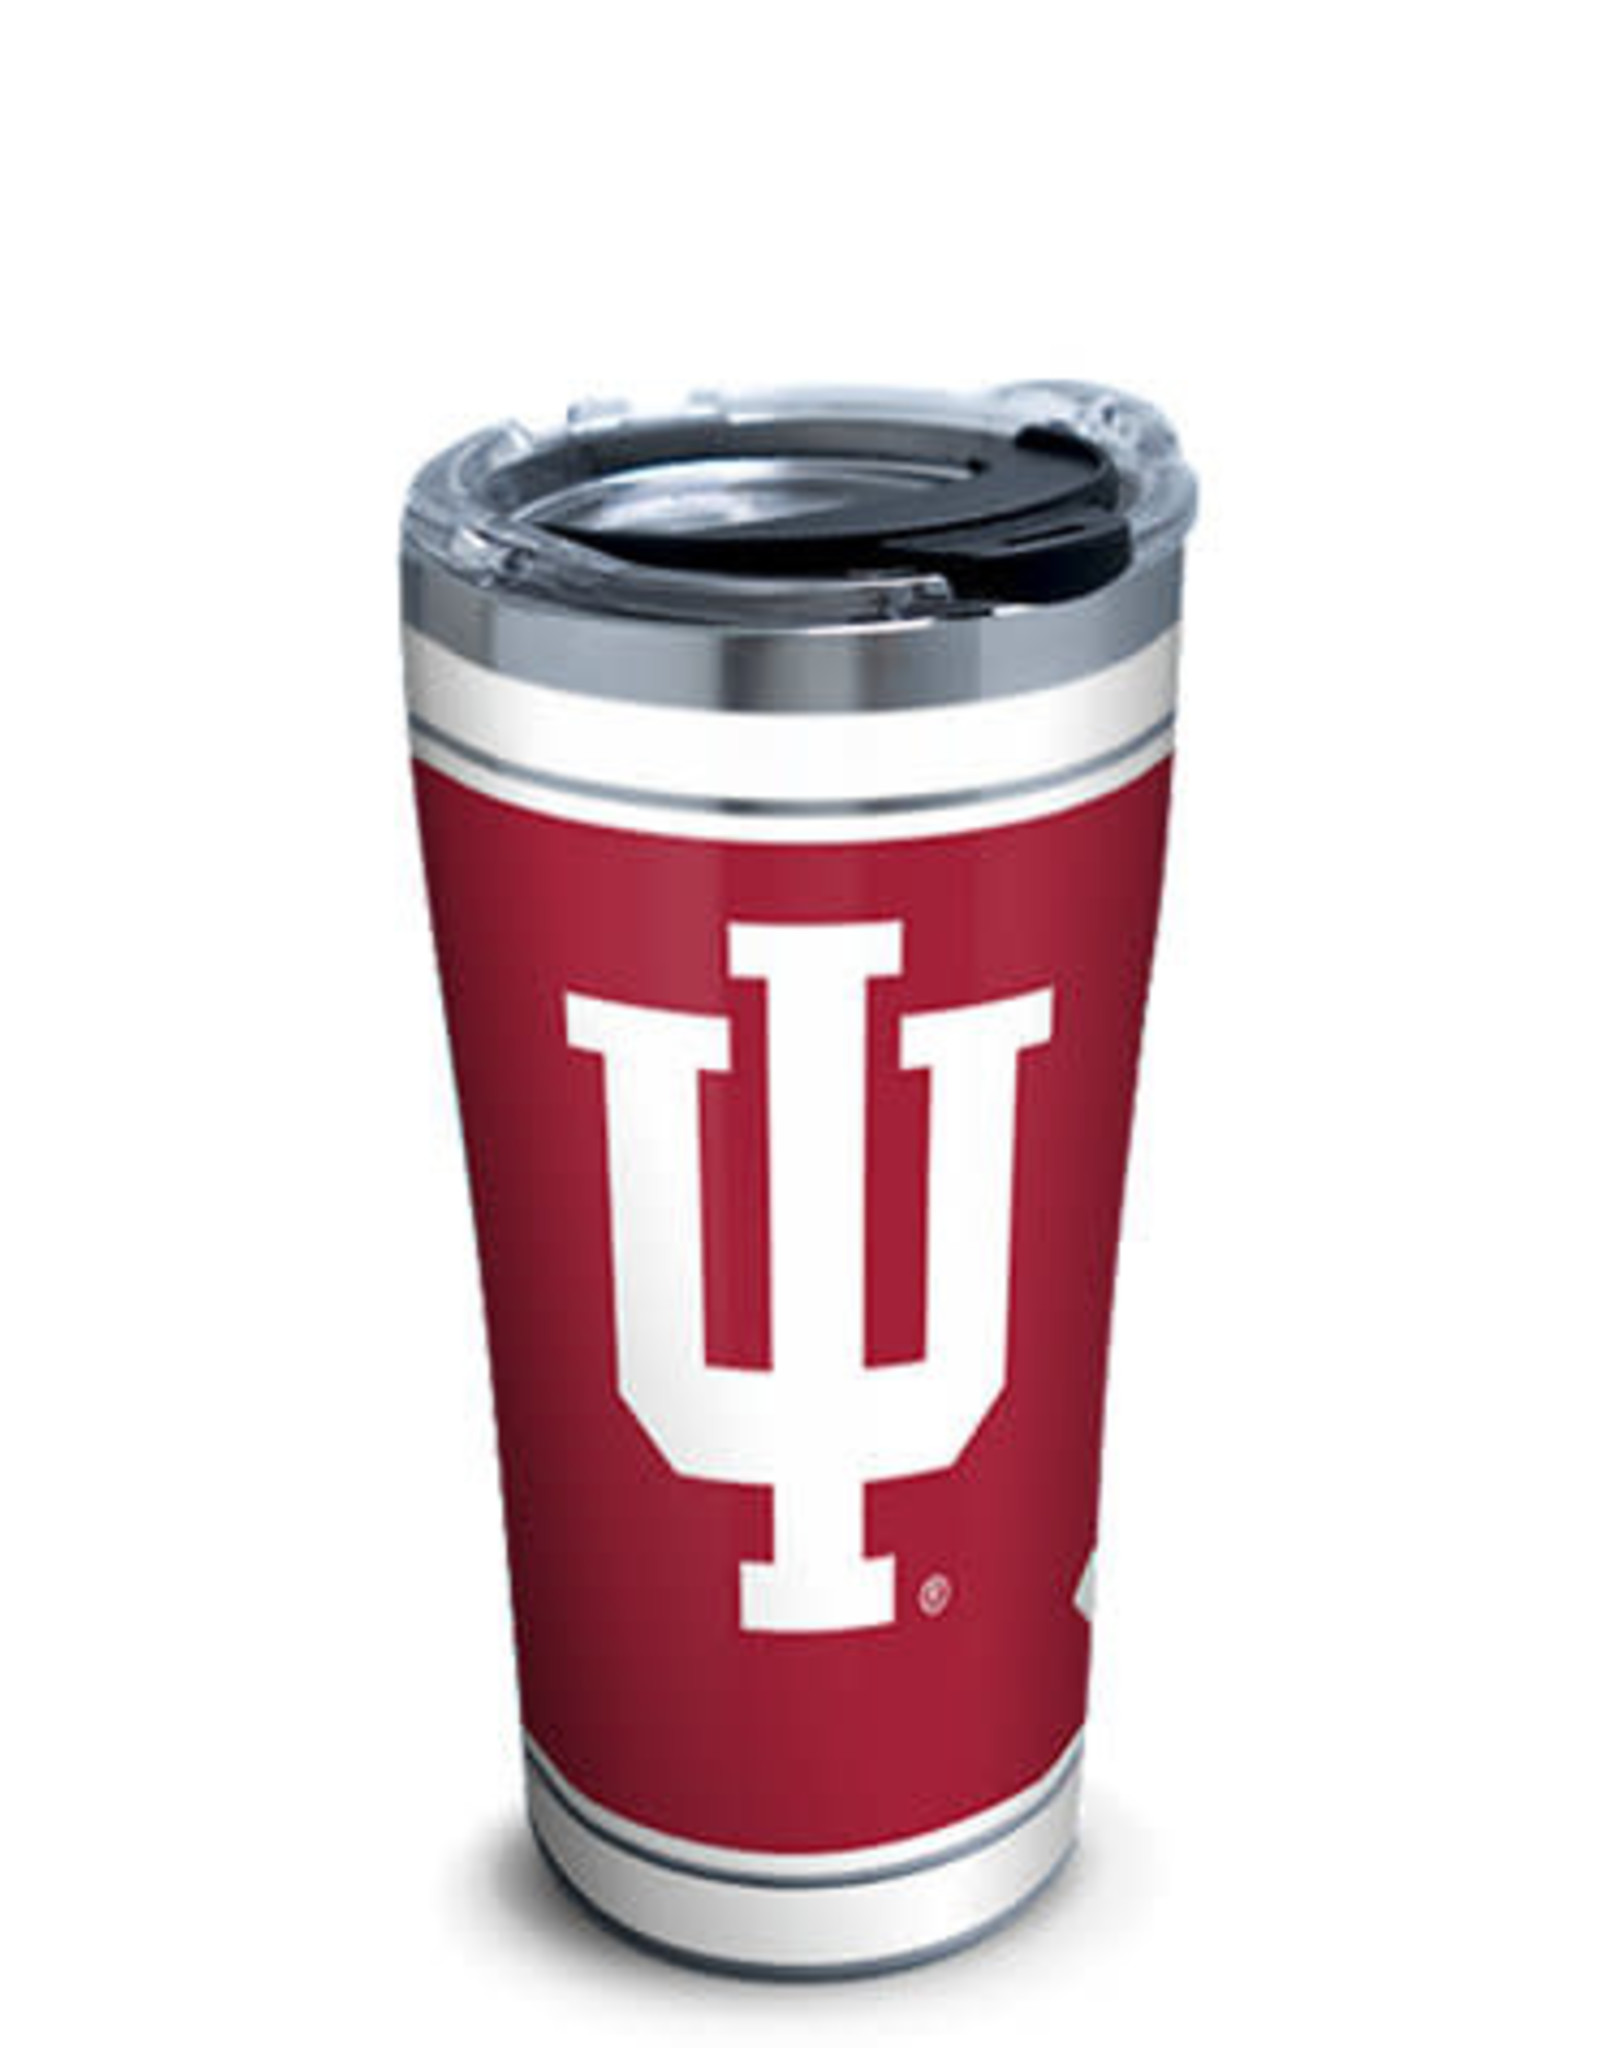 Tervis Tumbler Stainless Indiana Campus